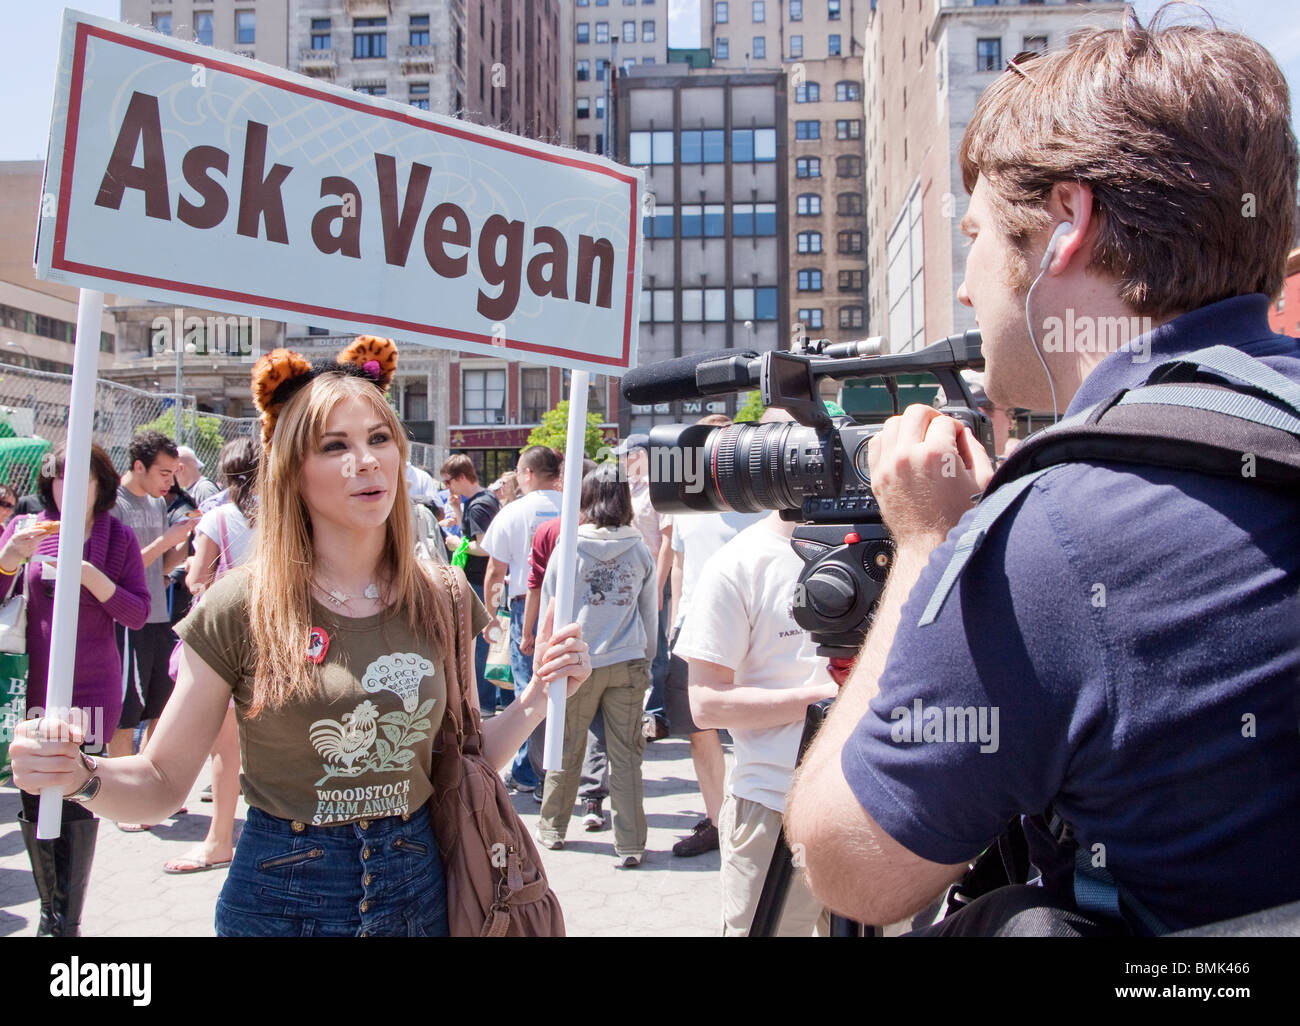 Vegetarian being covered by the media during the Veggie Pride Parade. Stock Photo